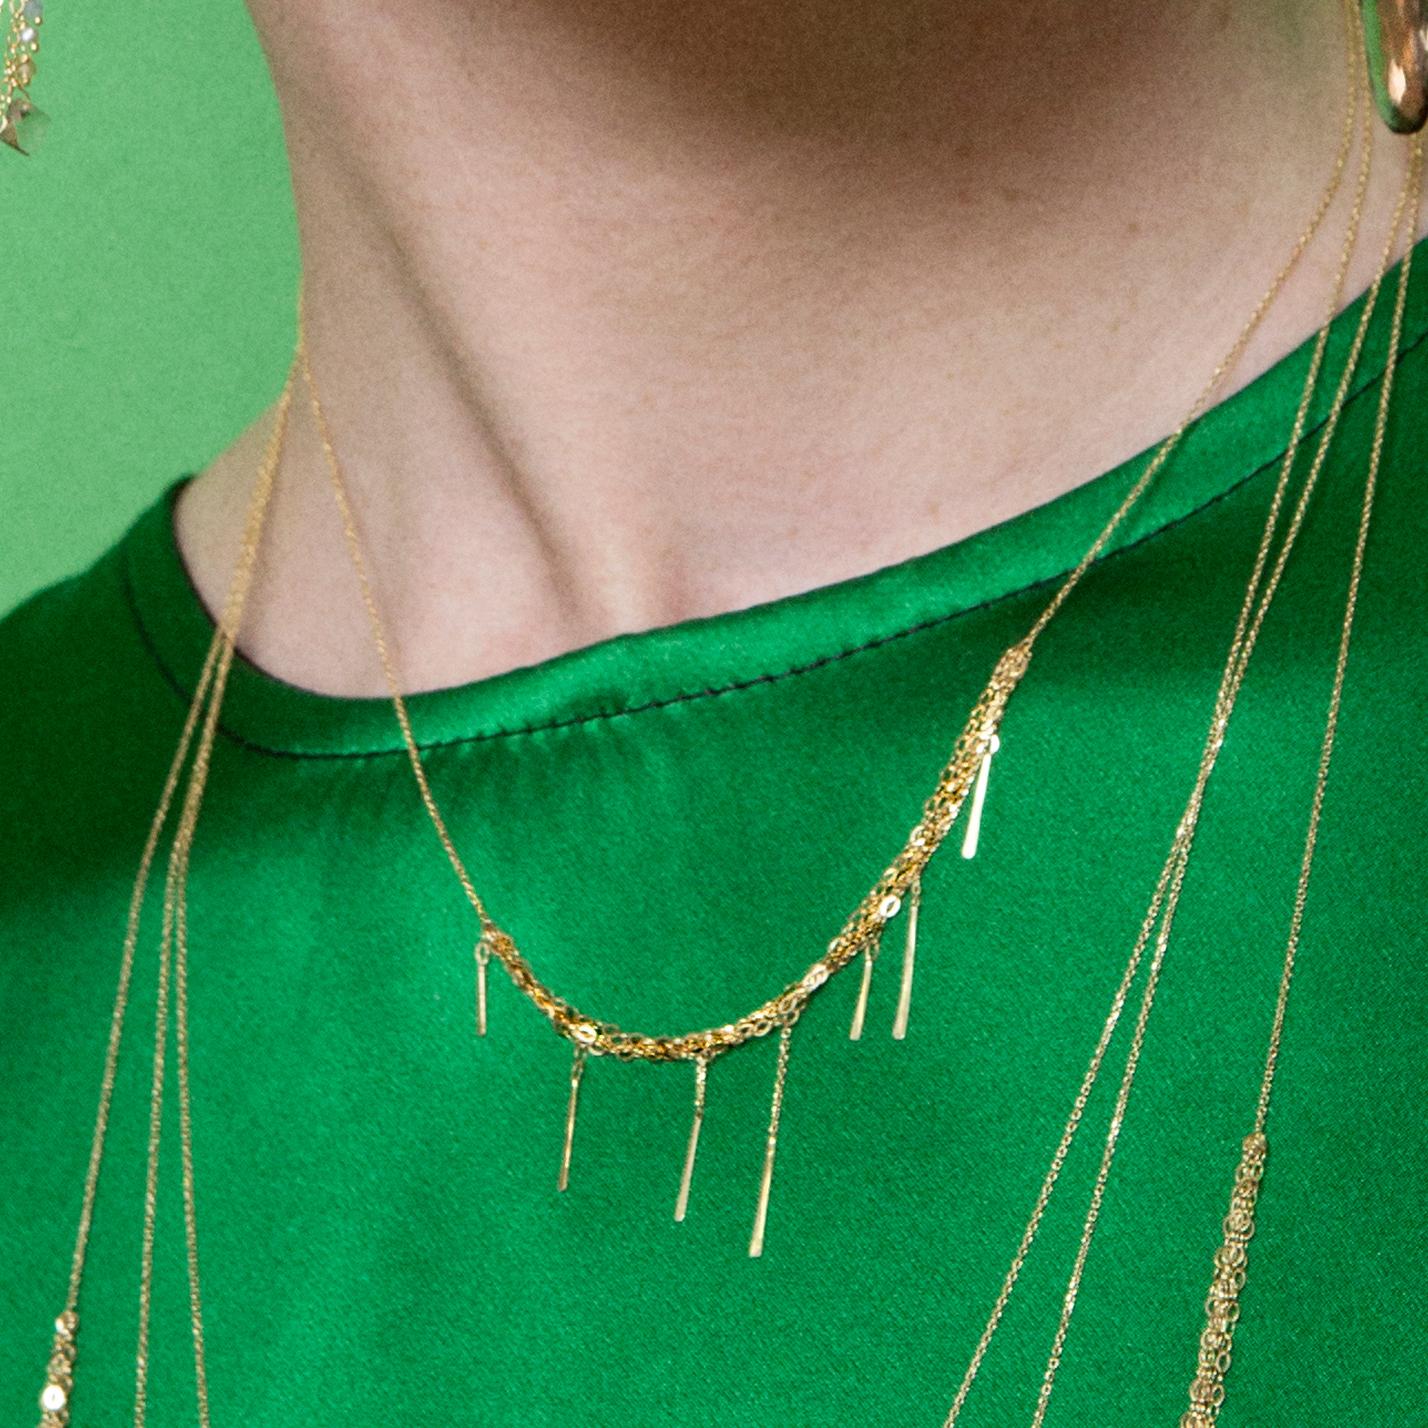 This 18k yellow gold necklace from Sweet Pea's 'Sycamore' collection is a classic.  The length is 40cm but this design can be ordered in different lengths, just get in touch for more details. With a section of layered chains and small hanging bar